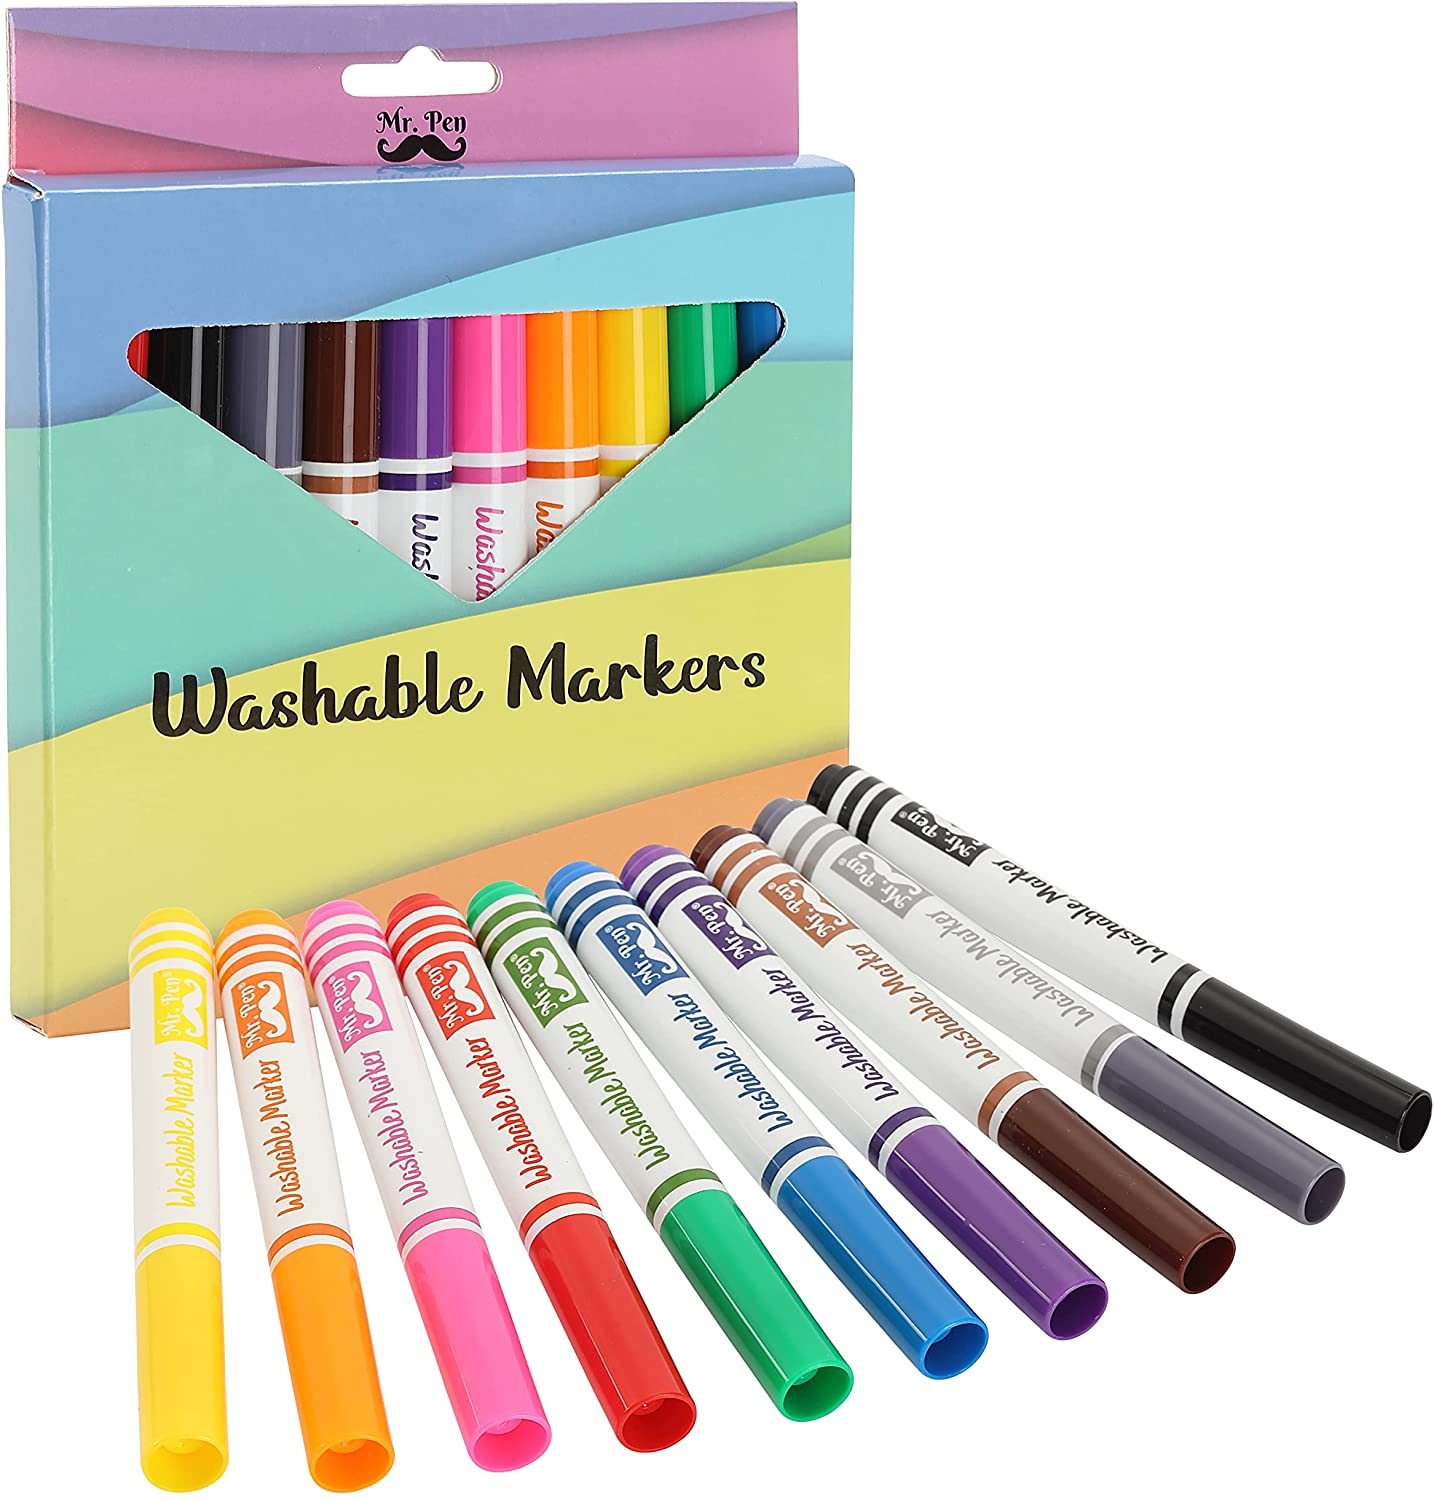 Buy Crayola Pip-Squeaks Washable Markers Assorted